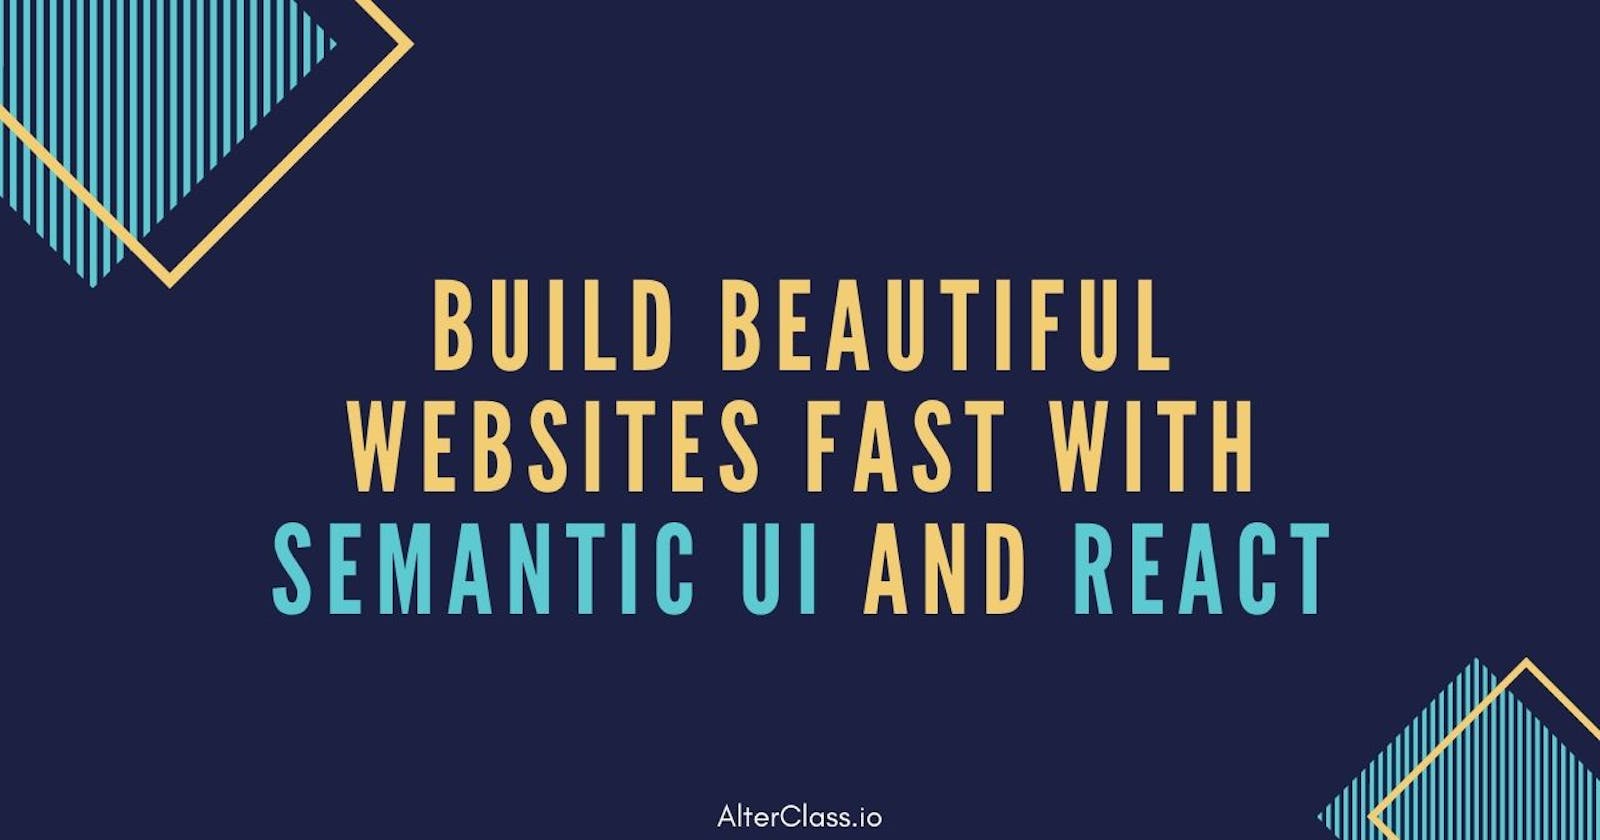 Build Beautiful Websites Fast With Semantic UI And React